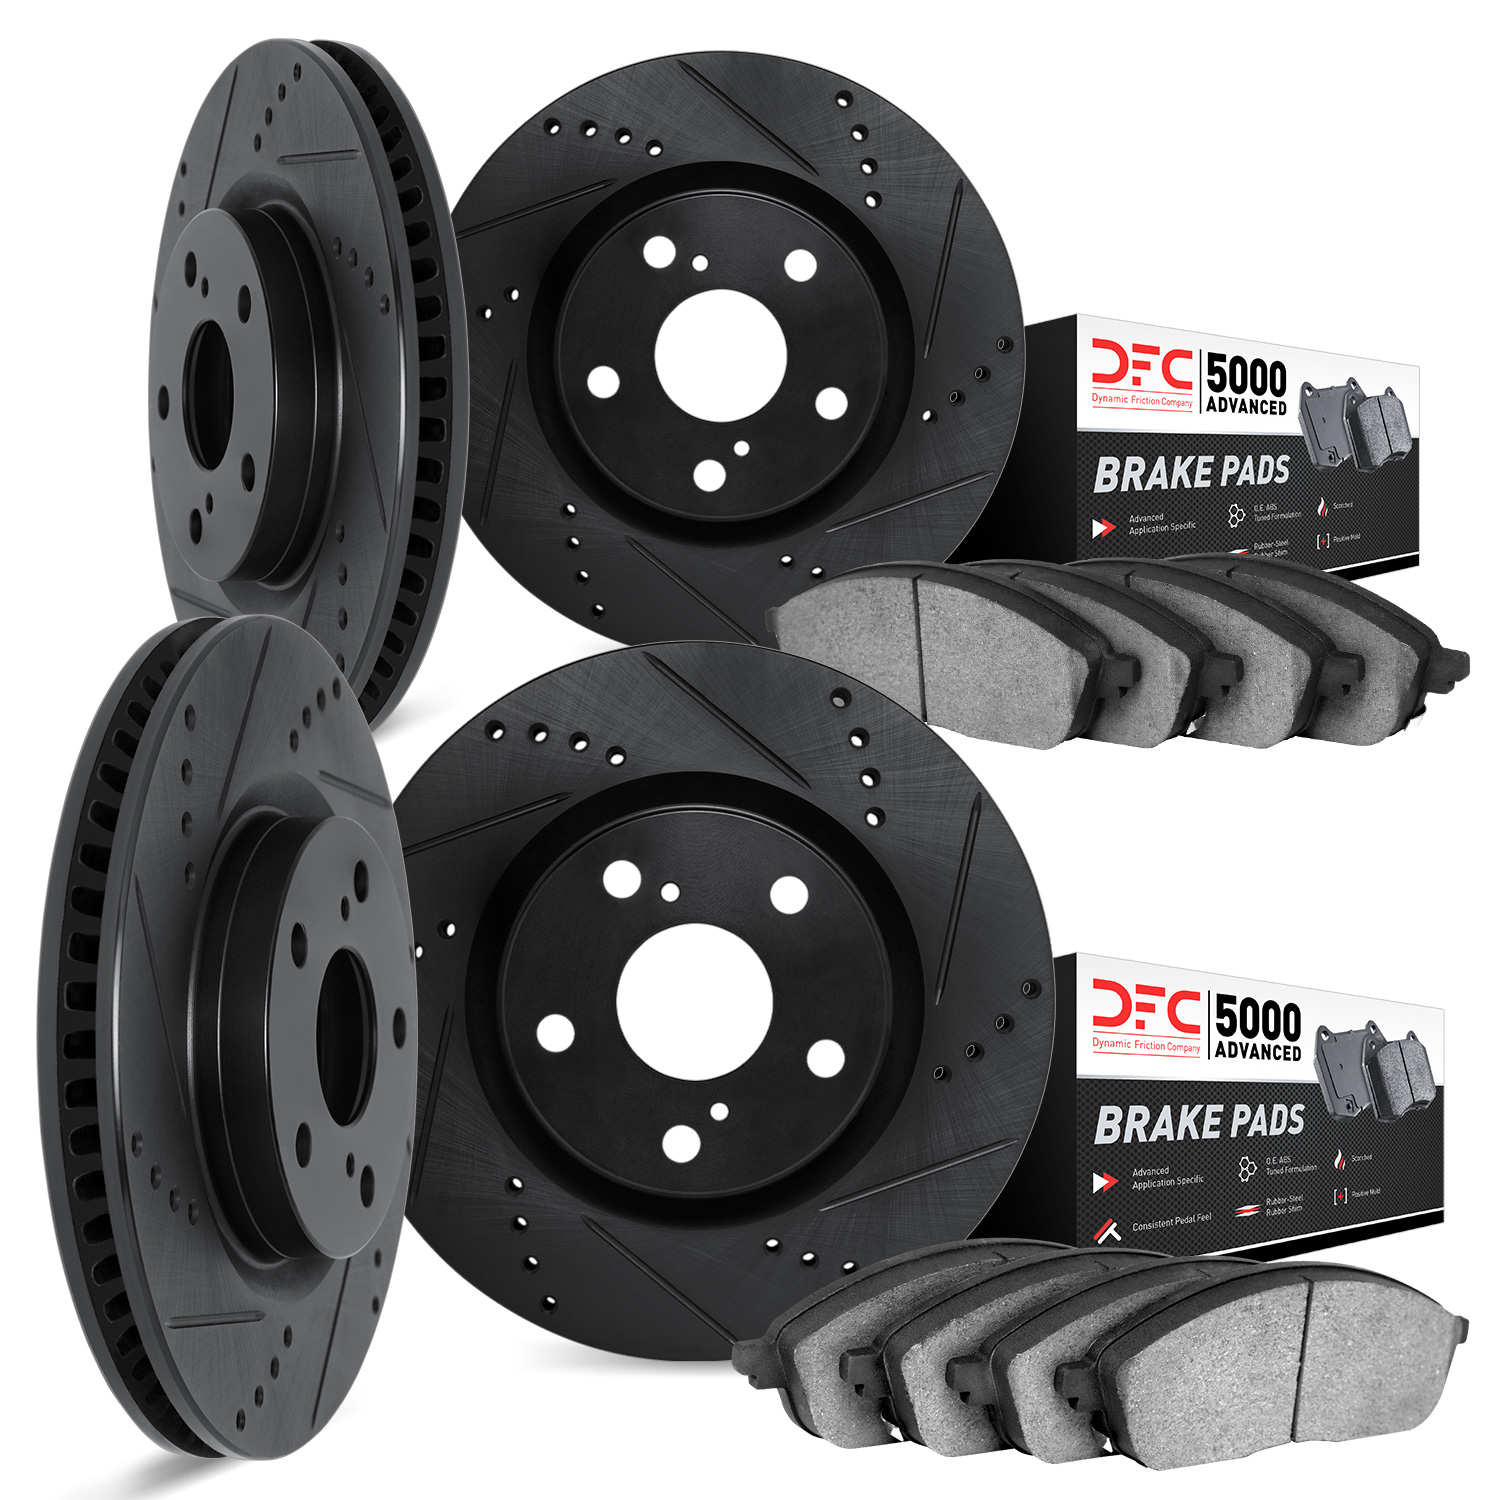 8504-67117 Drilled/Slotted Brake Rotors w/5000 Advanced Brake Pads Kit [Black], Fits Select Infiniti/Nissan, Position: Front and